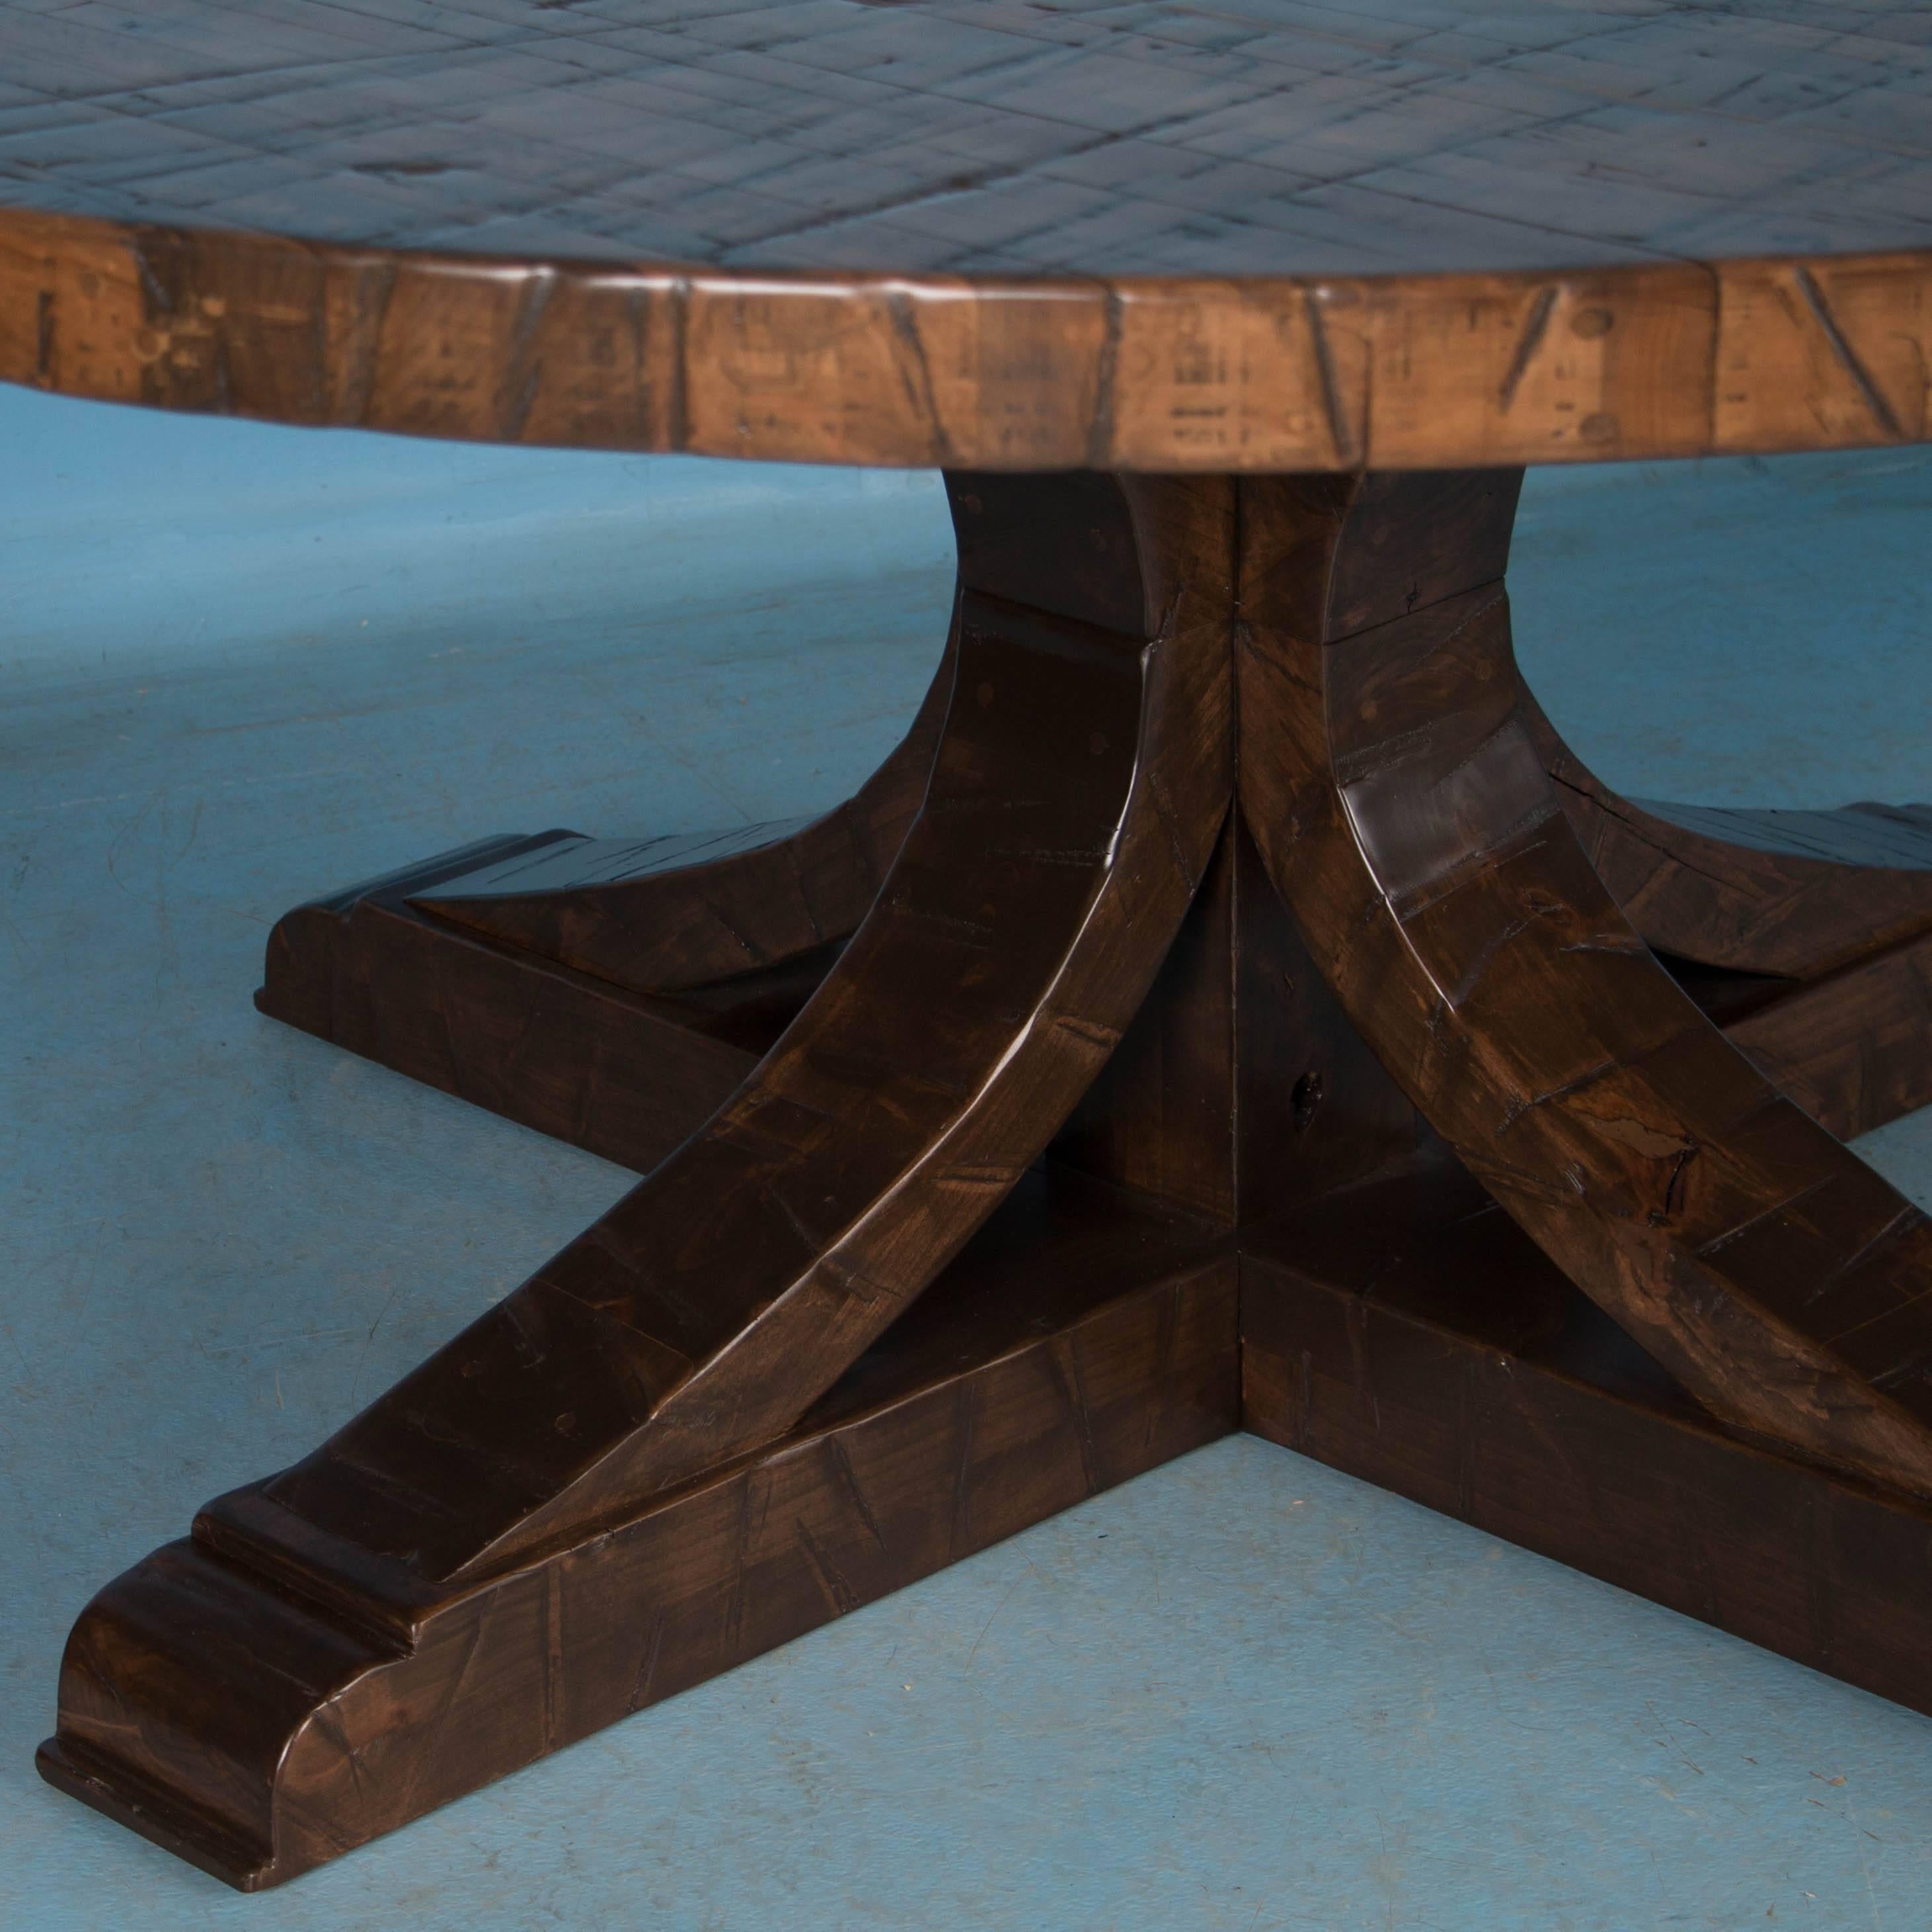 Contemporary Large Round Dining Table Made from Reclaimed Maple